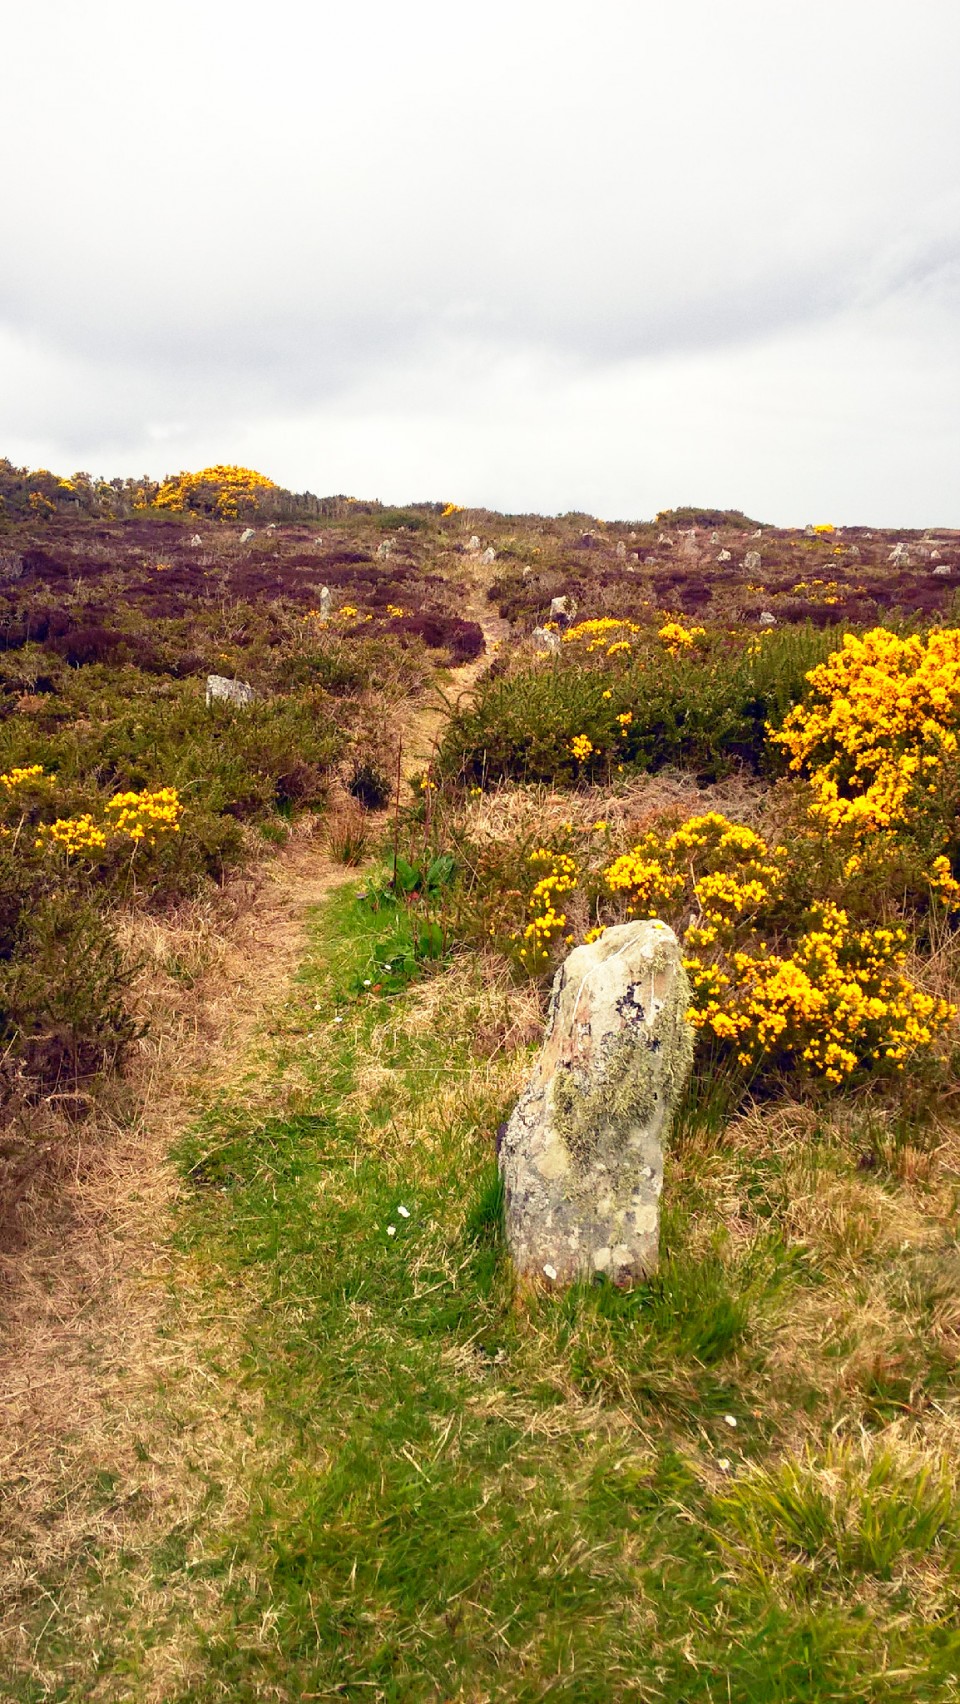 Hill O'Many Stanes (Multiple Stone Rows / Avenue) by carol27